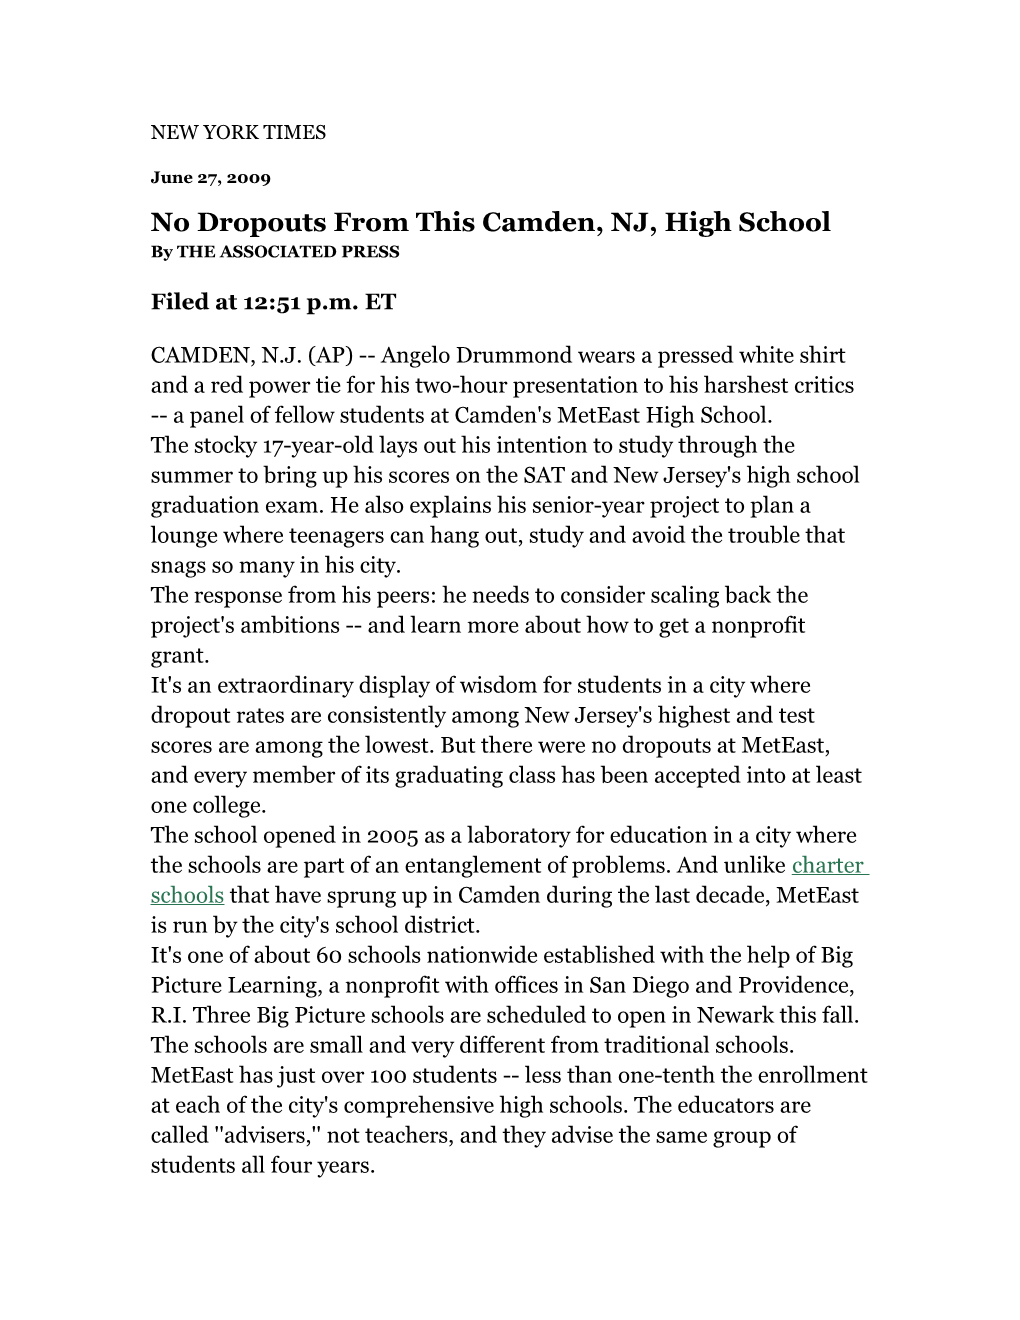 No Dropouts from This Camden, NJ, High School